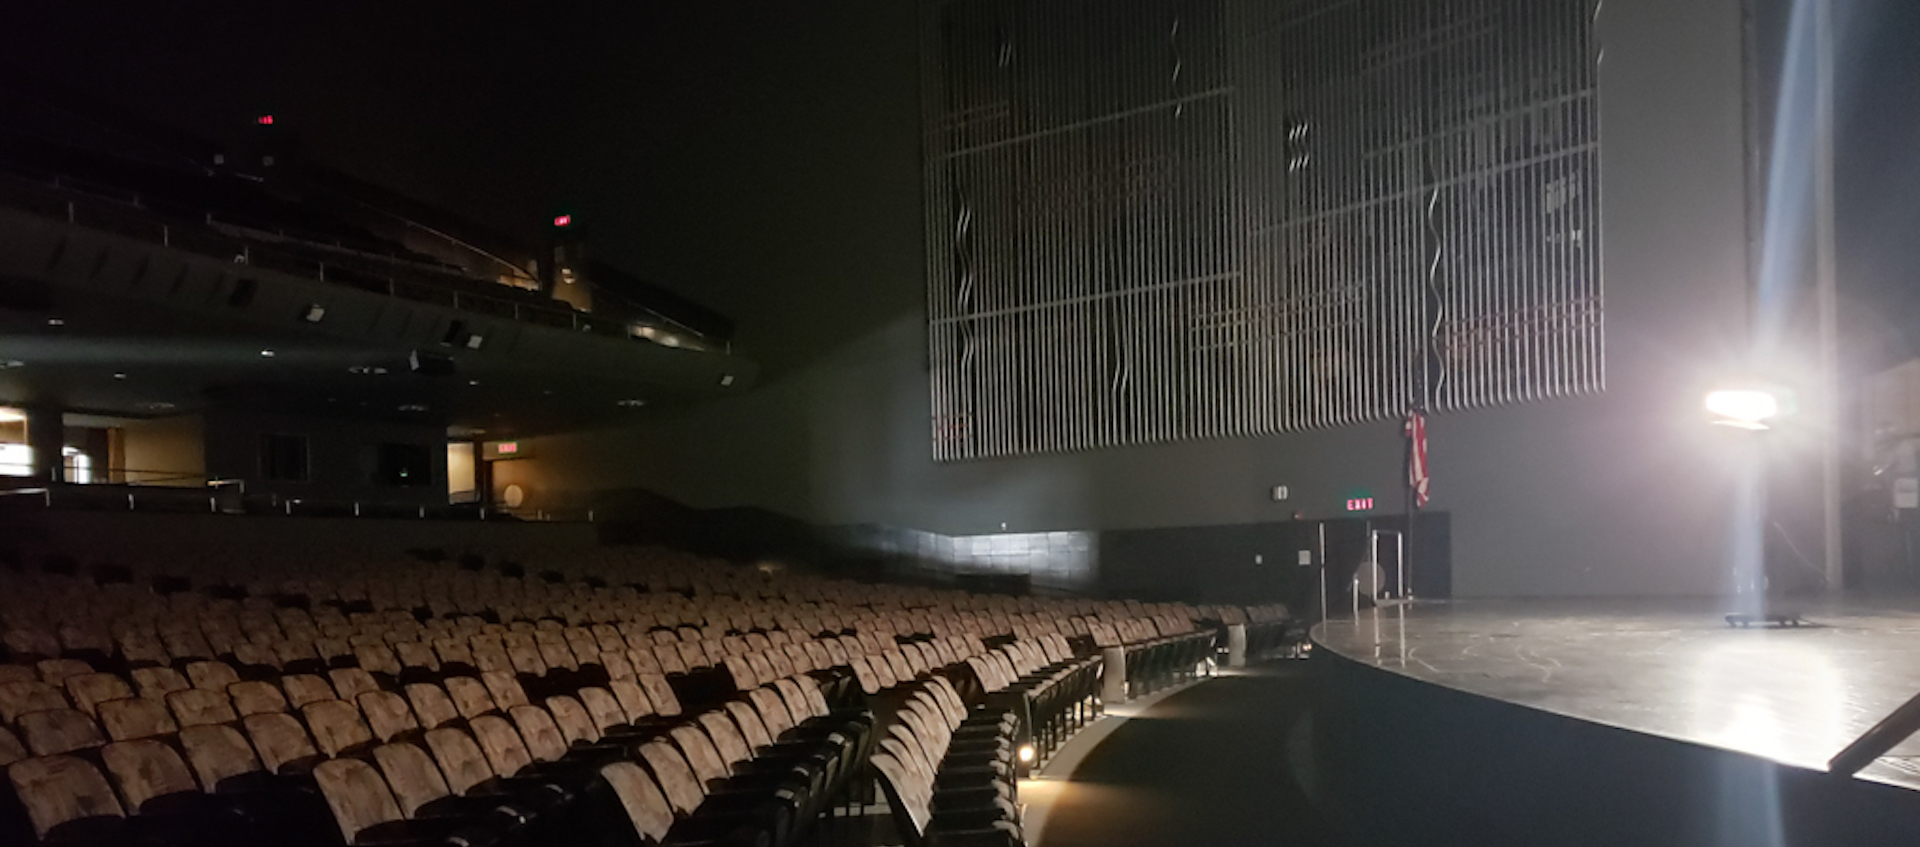 A side view of an empty Mershon Auditorium lit by a single bare bulb lamp on stage